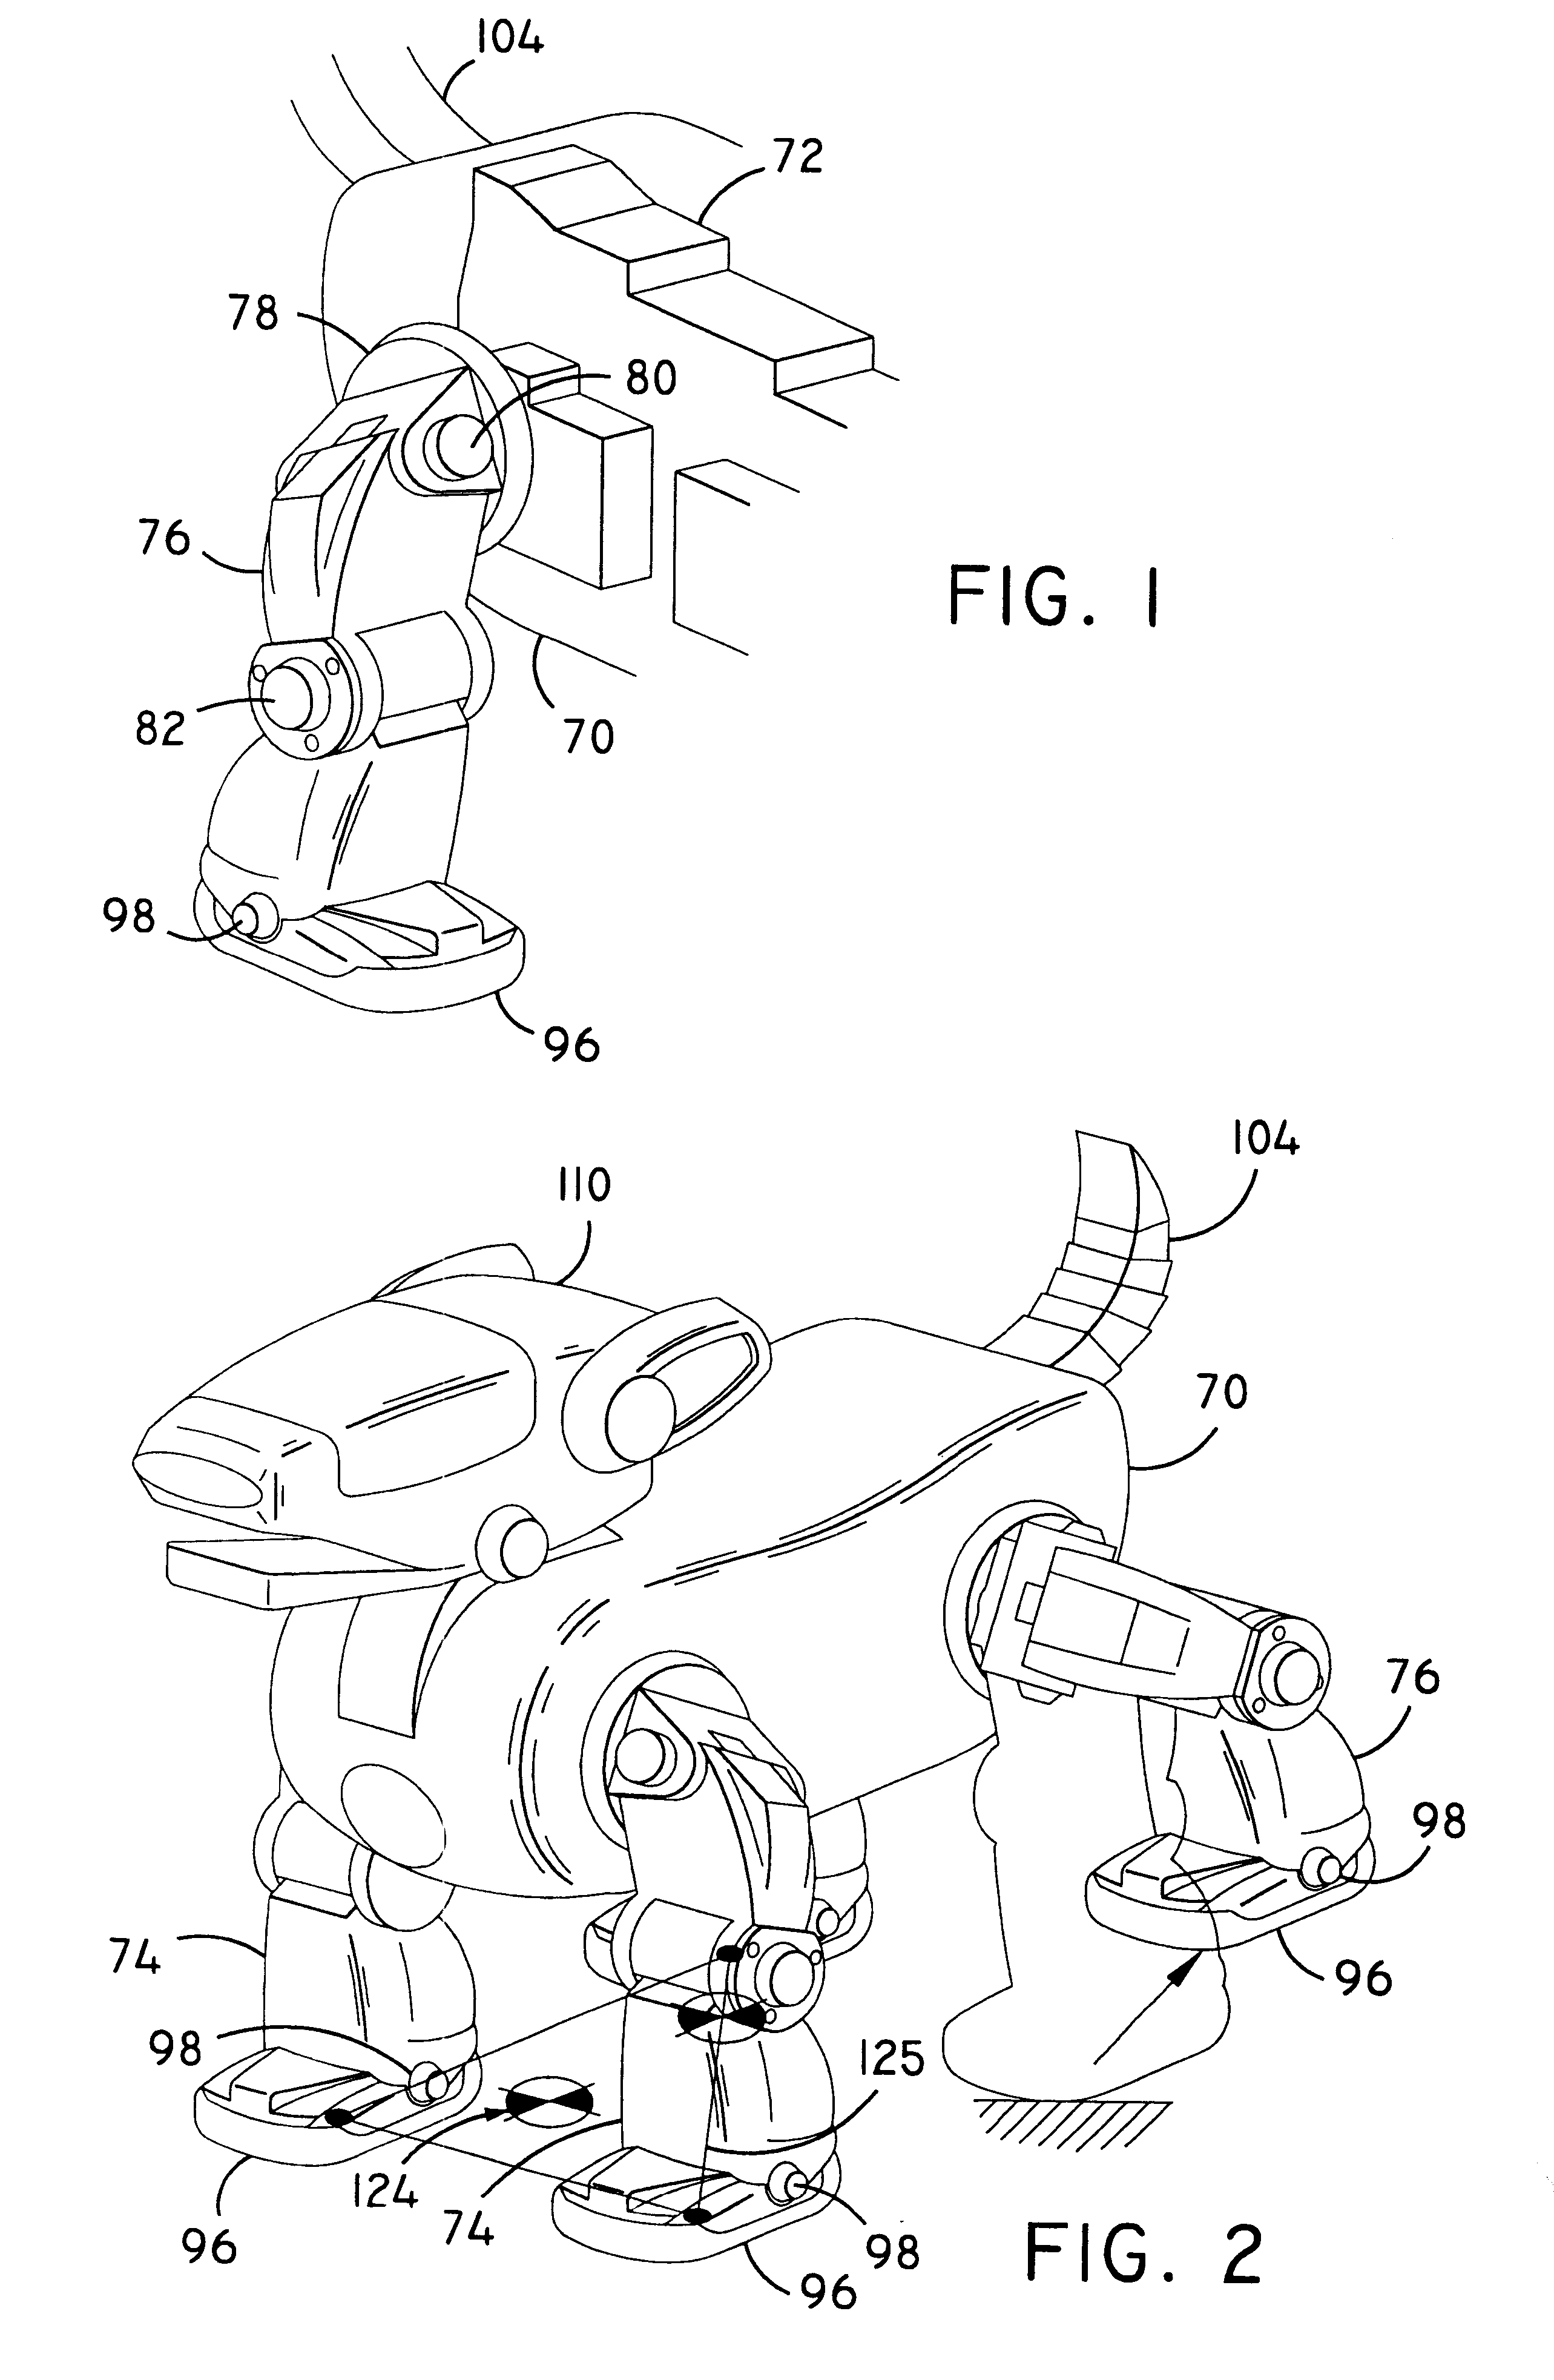 Self-stabilizing walking apparatus that is capable of being reprogrammed or puppeteered